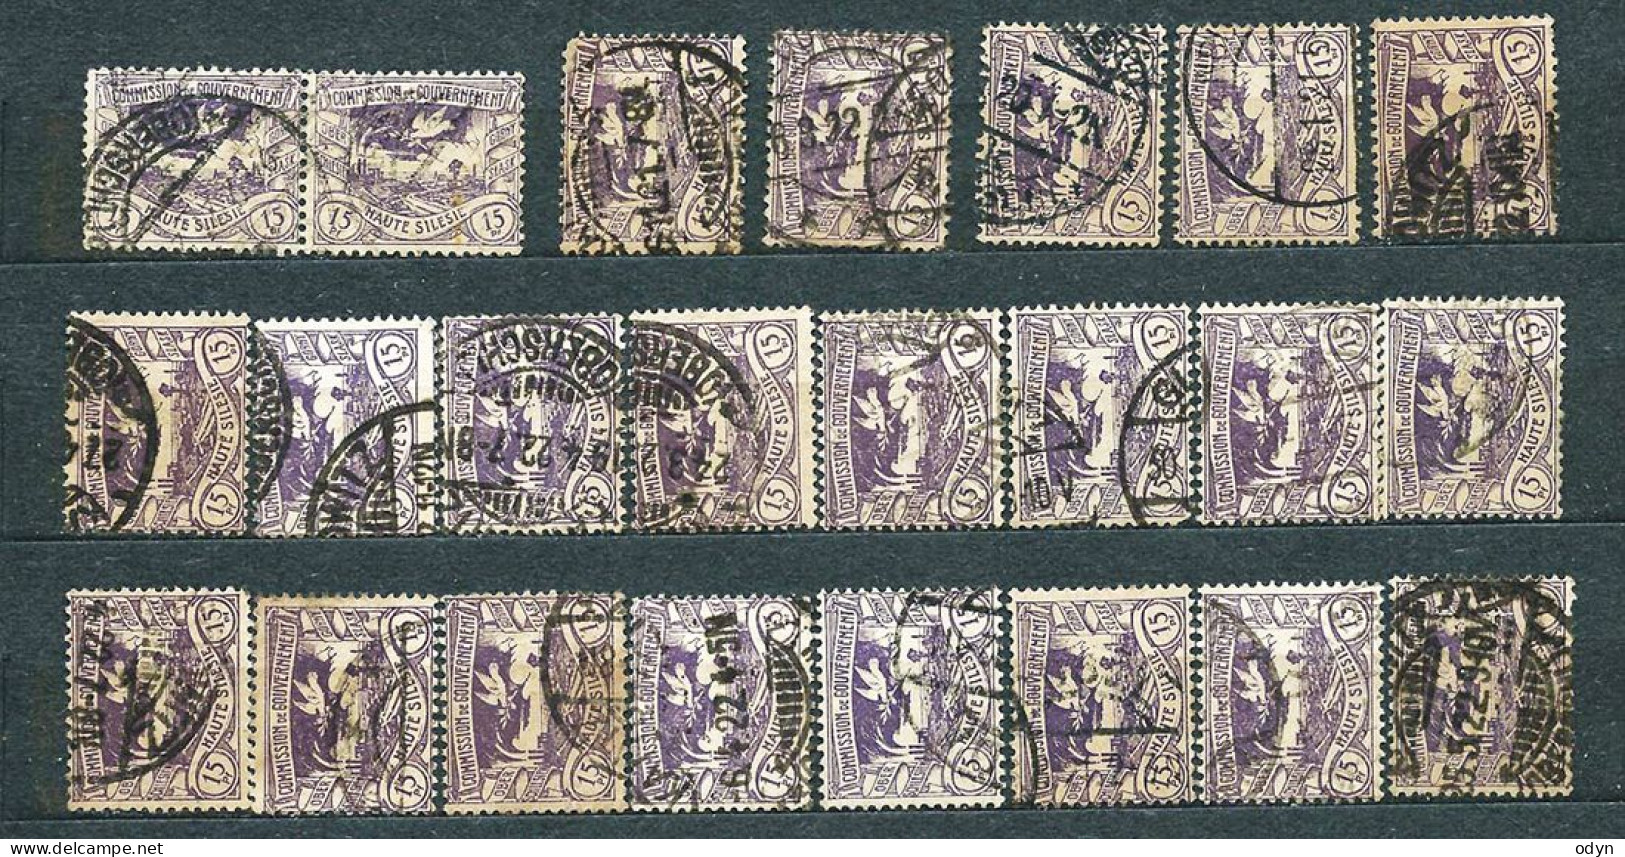 Plebiscite, Upper Silesia, 1920; lot of 287 stamps from set MiNr 13-29 - used